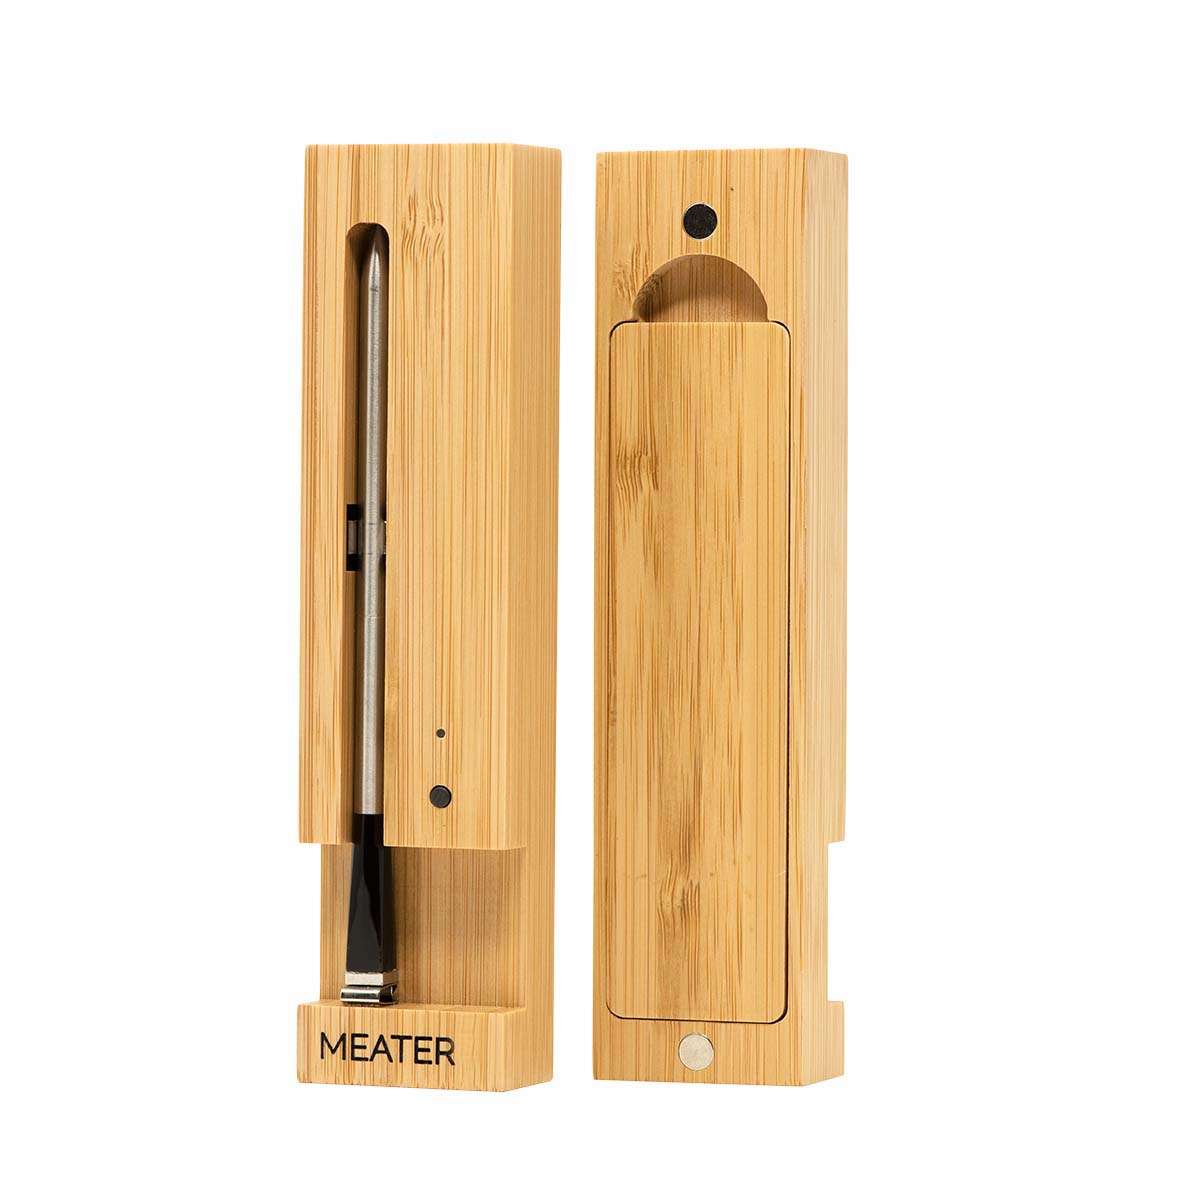 https://www.theoutdoorstore.co/wp-content/uploads/2021/12/meater-original-meat-thermometer-front-back-the-outdoor-store.jpg